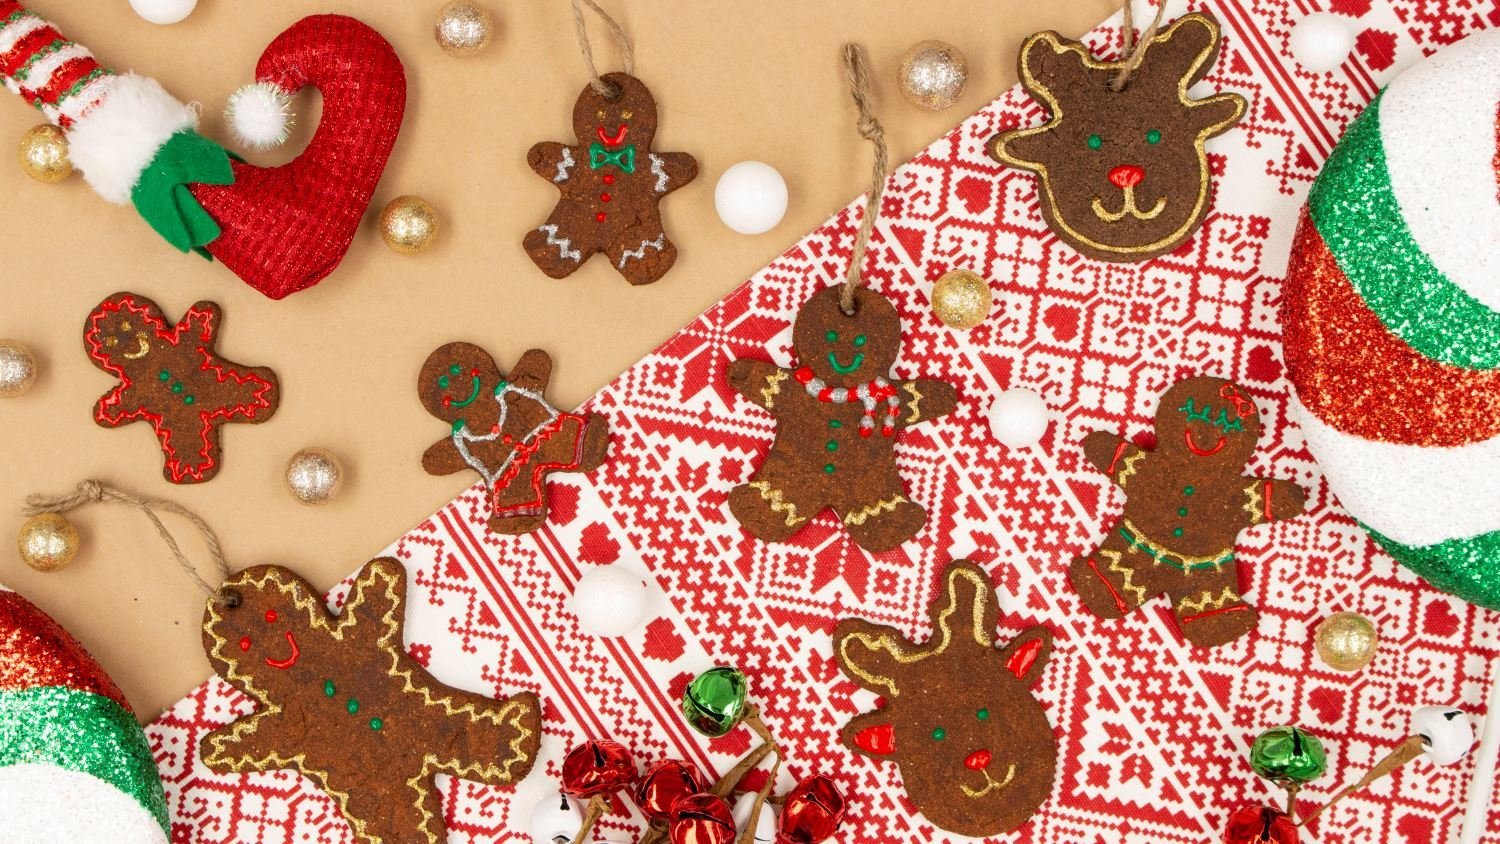 Homemade Christmas Gift Ideas Your Family & Friends Will Love